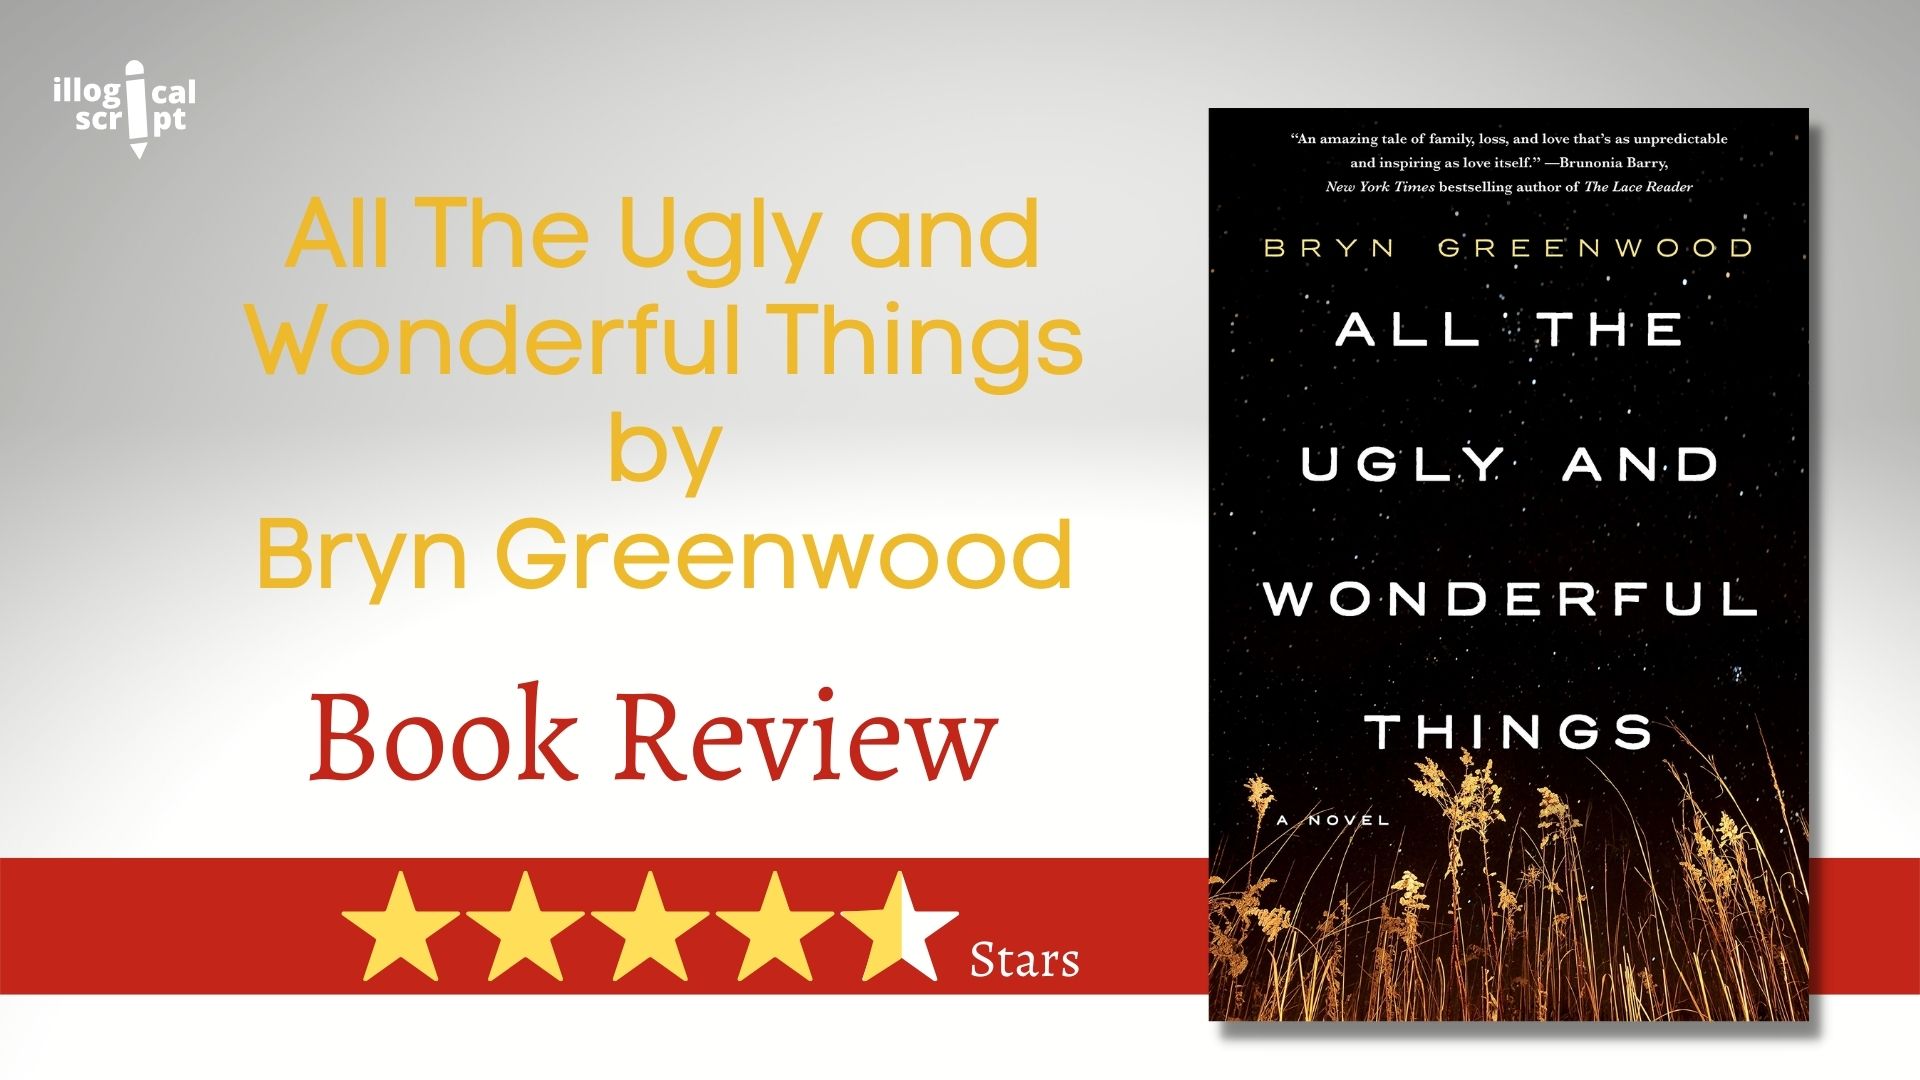 Book Review: All The Ugly and Wonderful Things by Bryn Greenwood